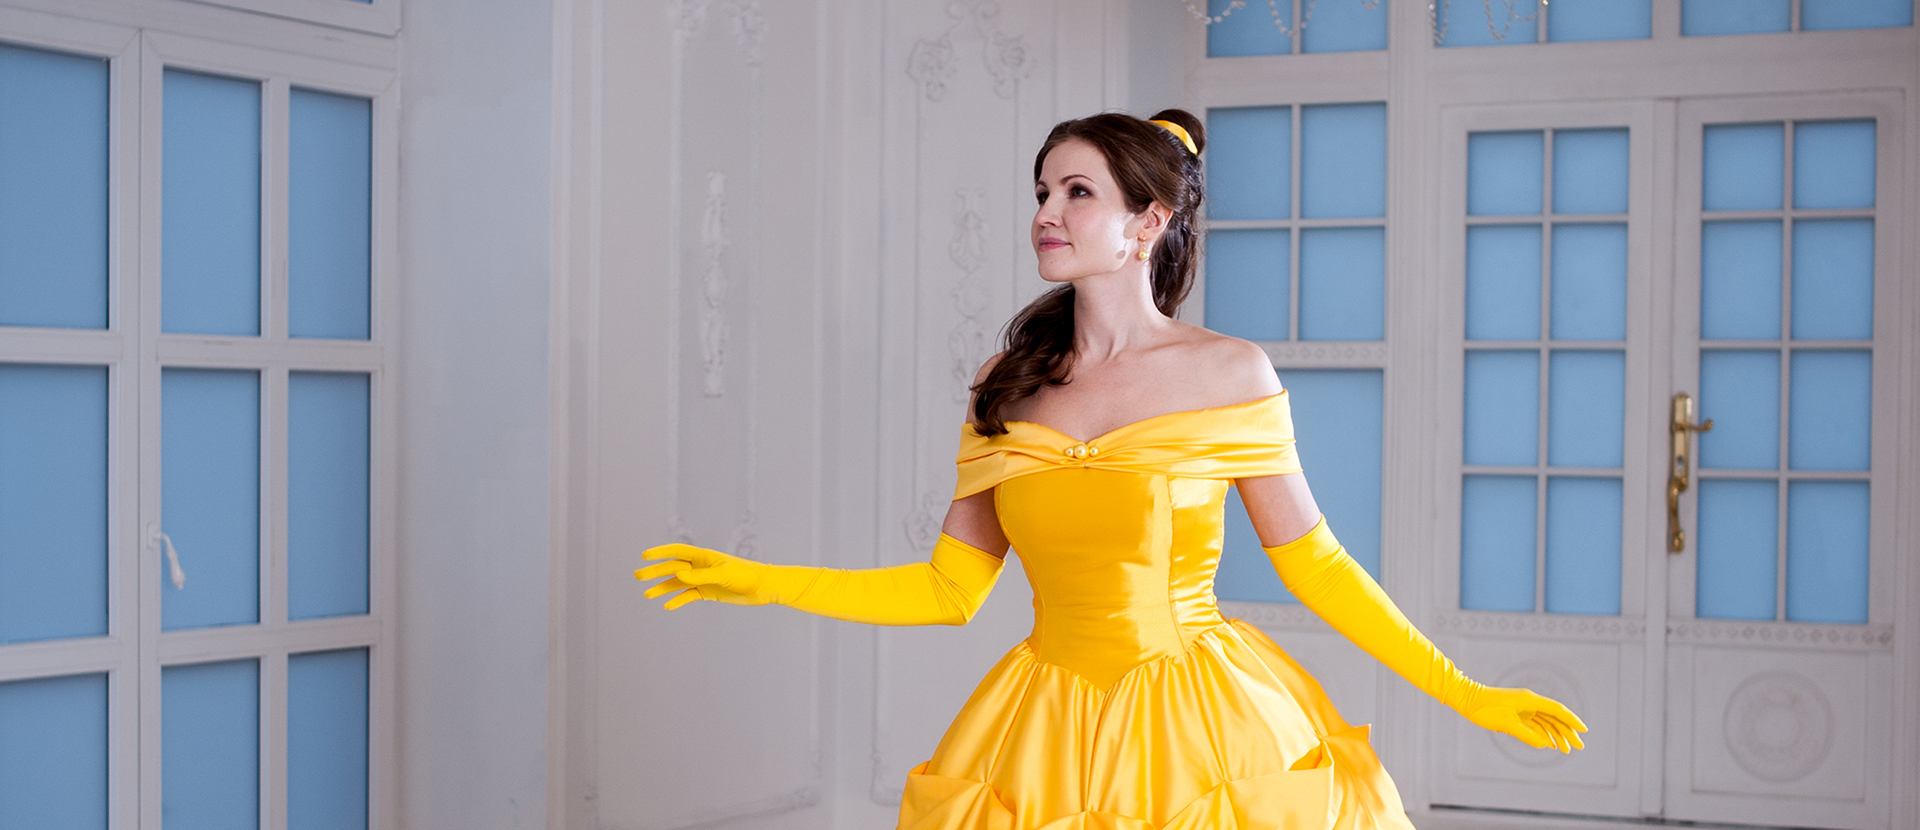 disney princess belle beauty and the beast ball